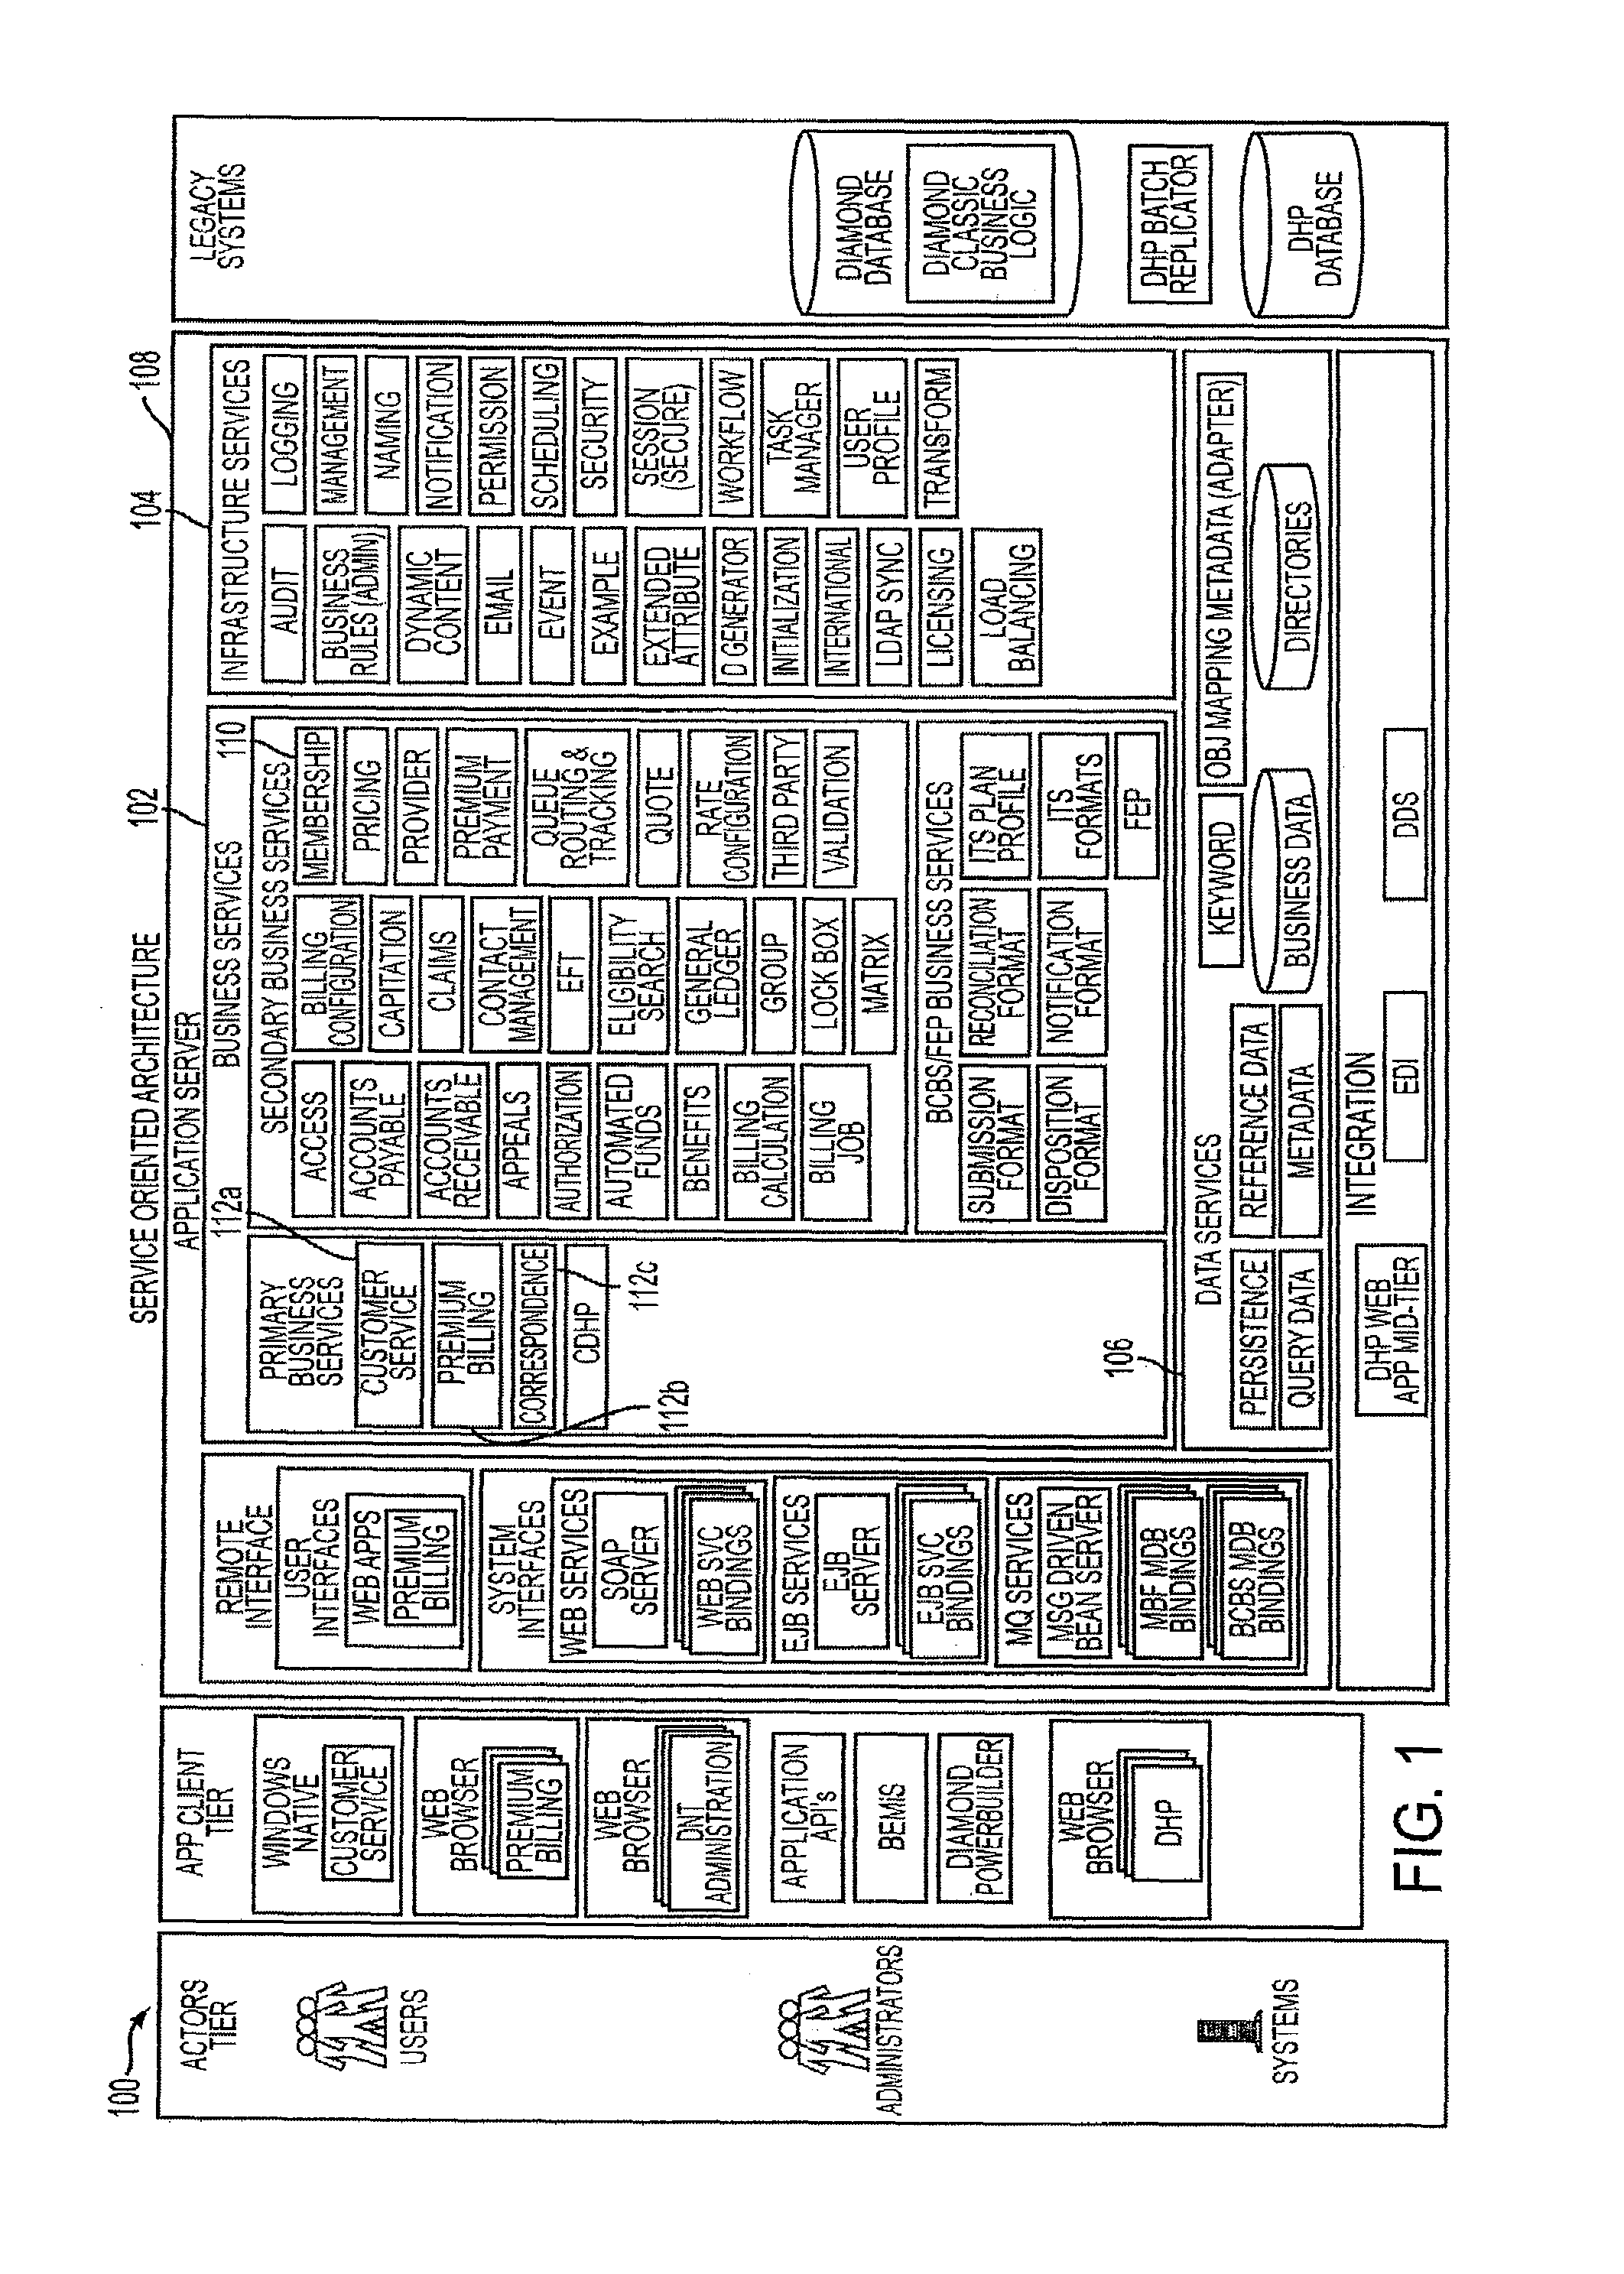 System and method for customizing a core product